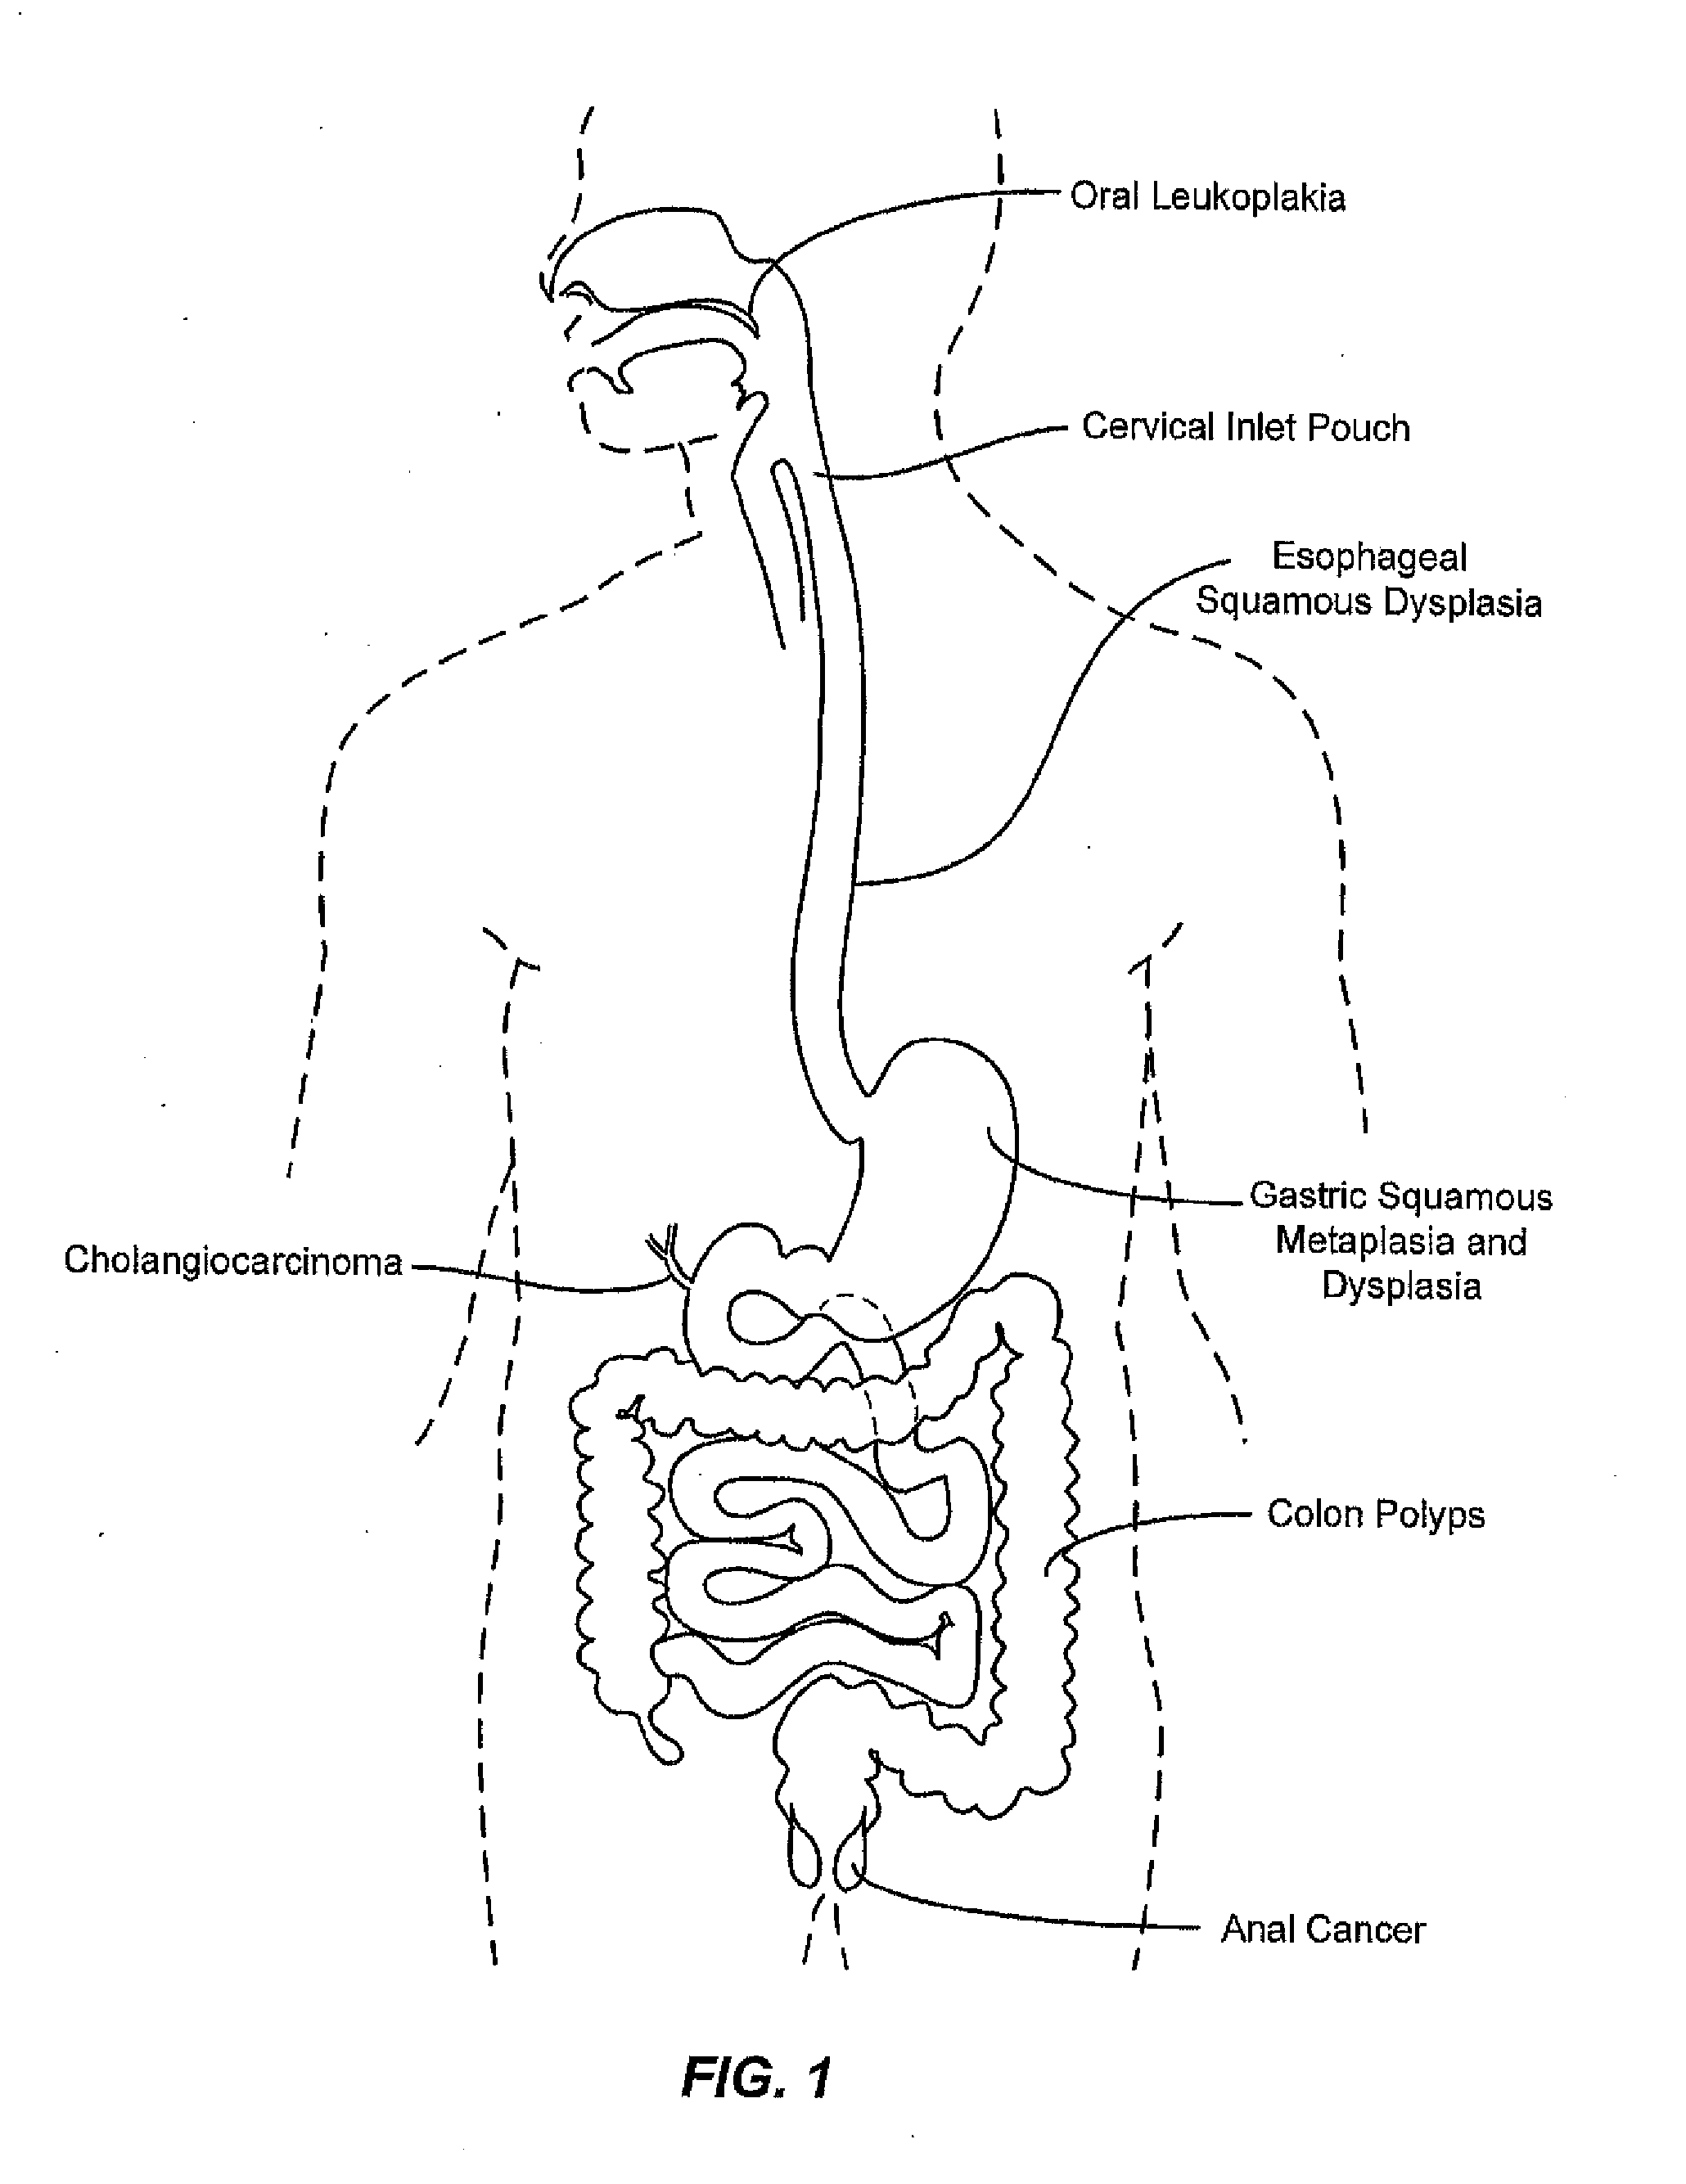 Method and Apparatus for Ablation of Benign, Pre-Cancerous and Early Cancerous Lesions That Originate Within the Epithelium and are Limited to the Mucosal Layer of the Gastrointestinal Tract